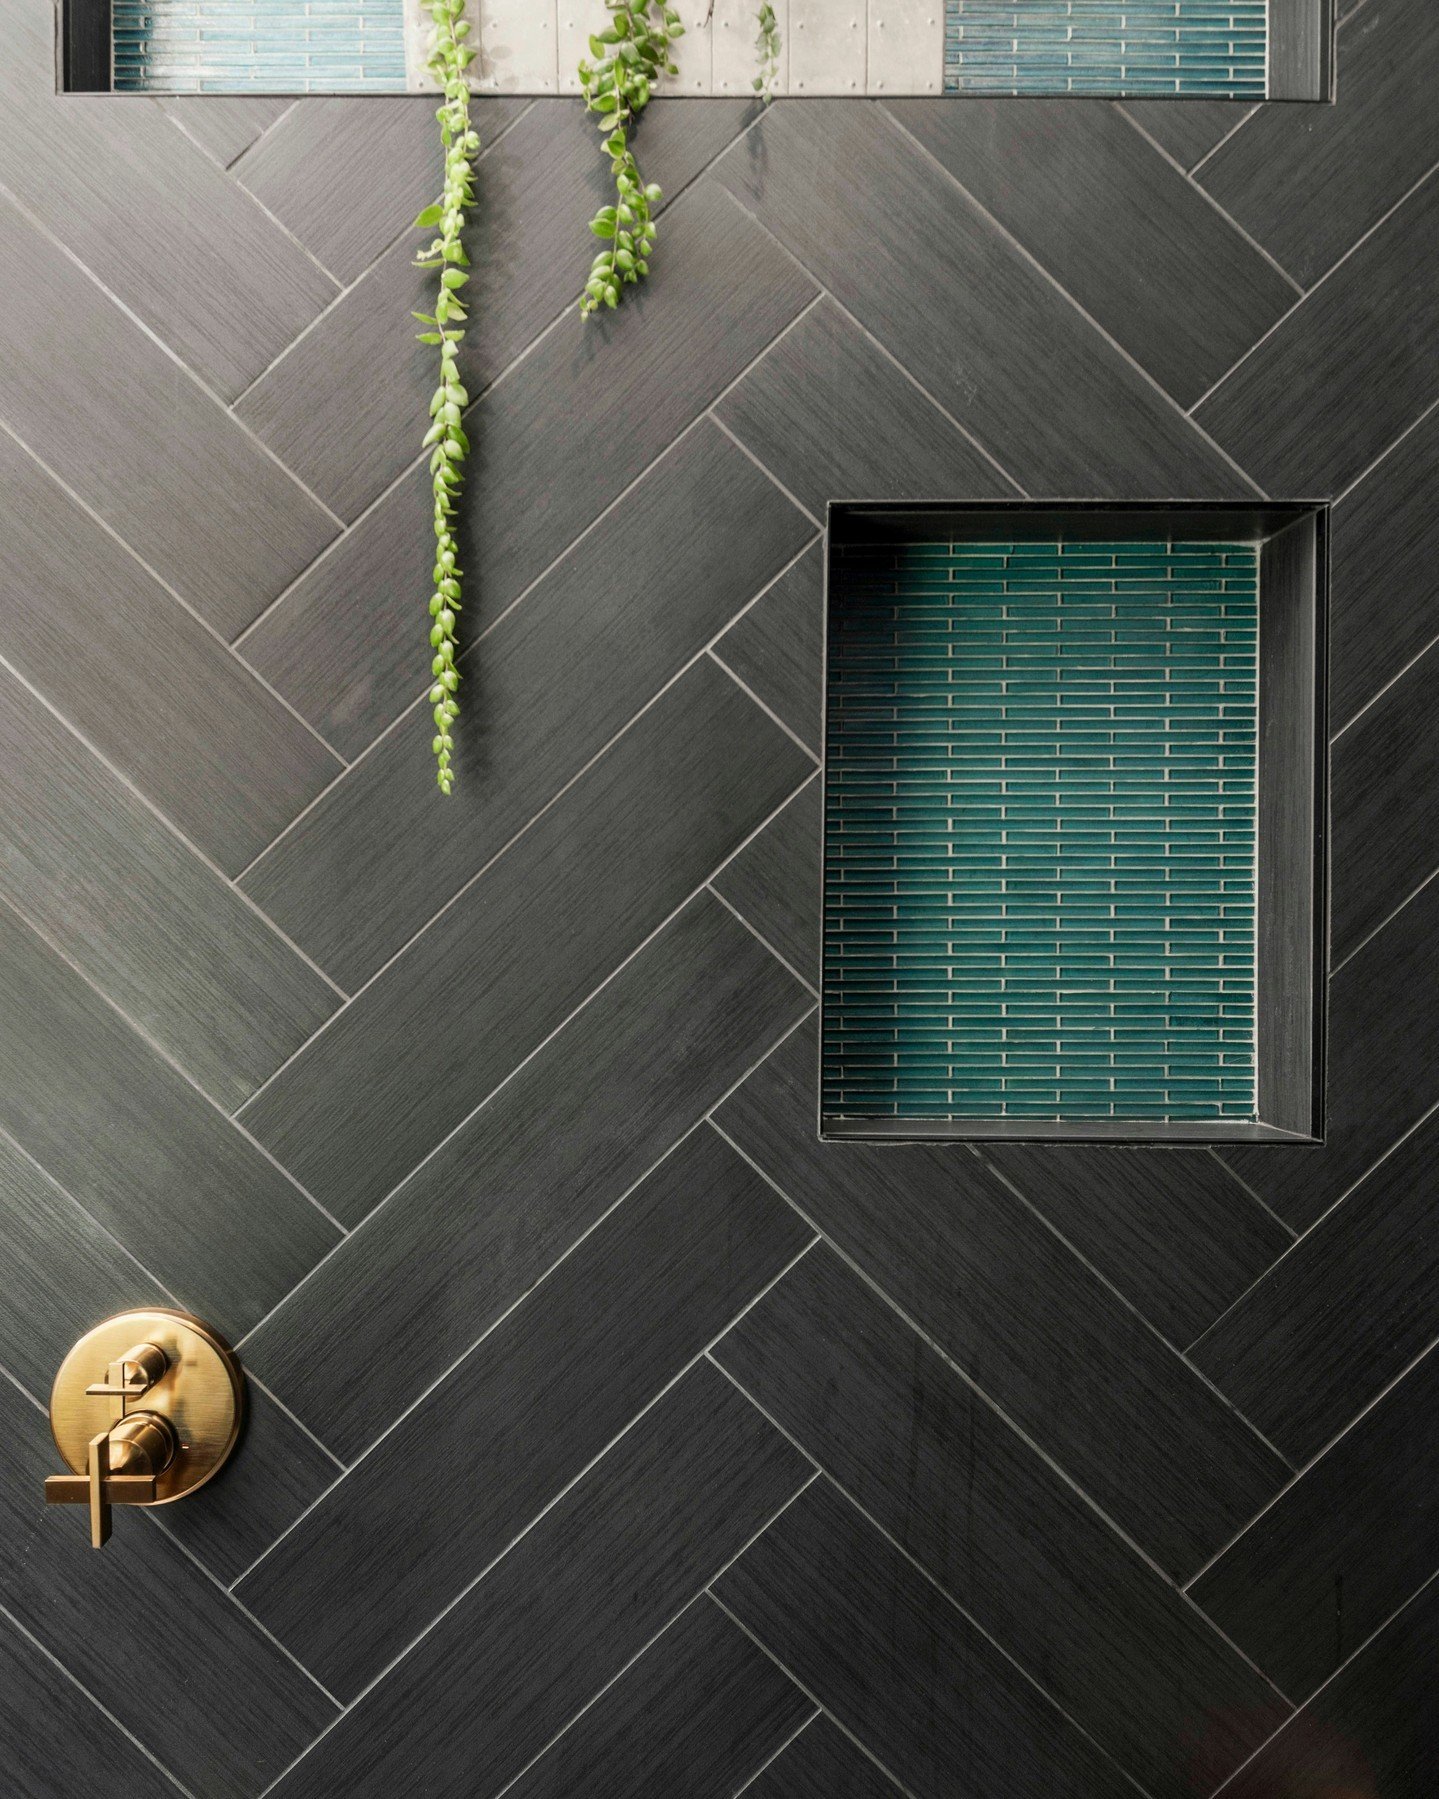 Fun fact: Tiles are your canvas for unique style! ✨  No matter the space, from contrasting colors to fun shapes, tiles let you showcase your personality.  What story will your tiles tell?

#TheHomestylesGroup #ShowerDesign #TileDesign #BathroomGoals 